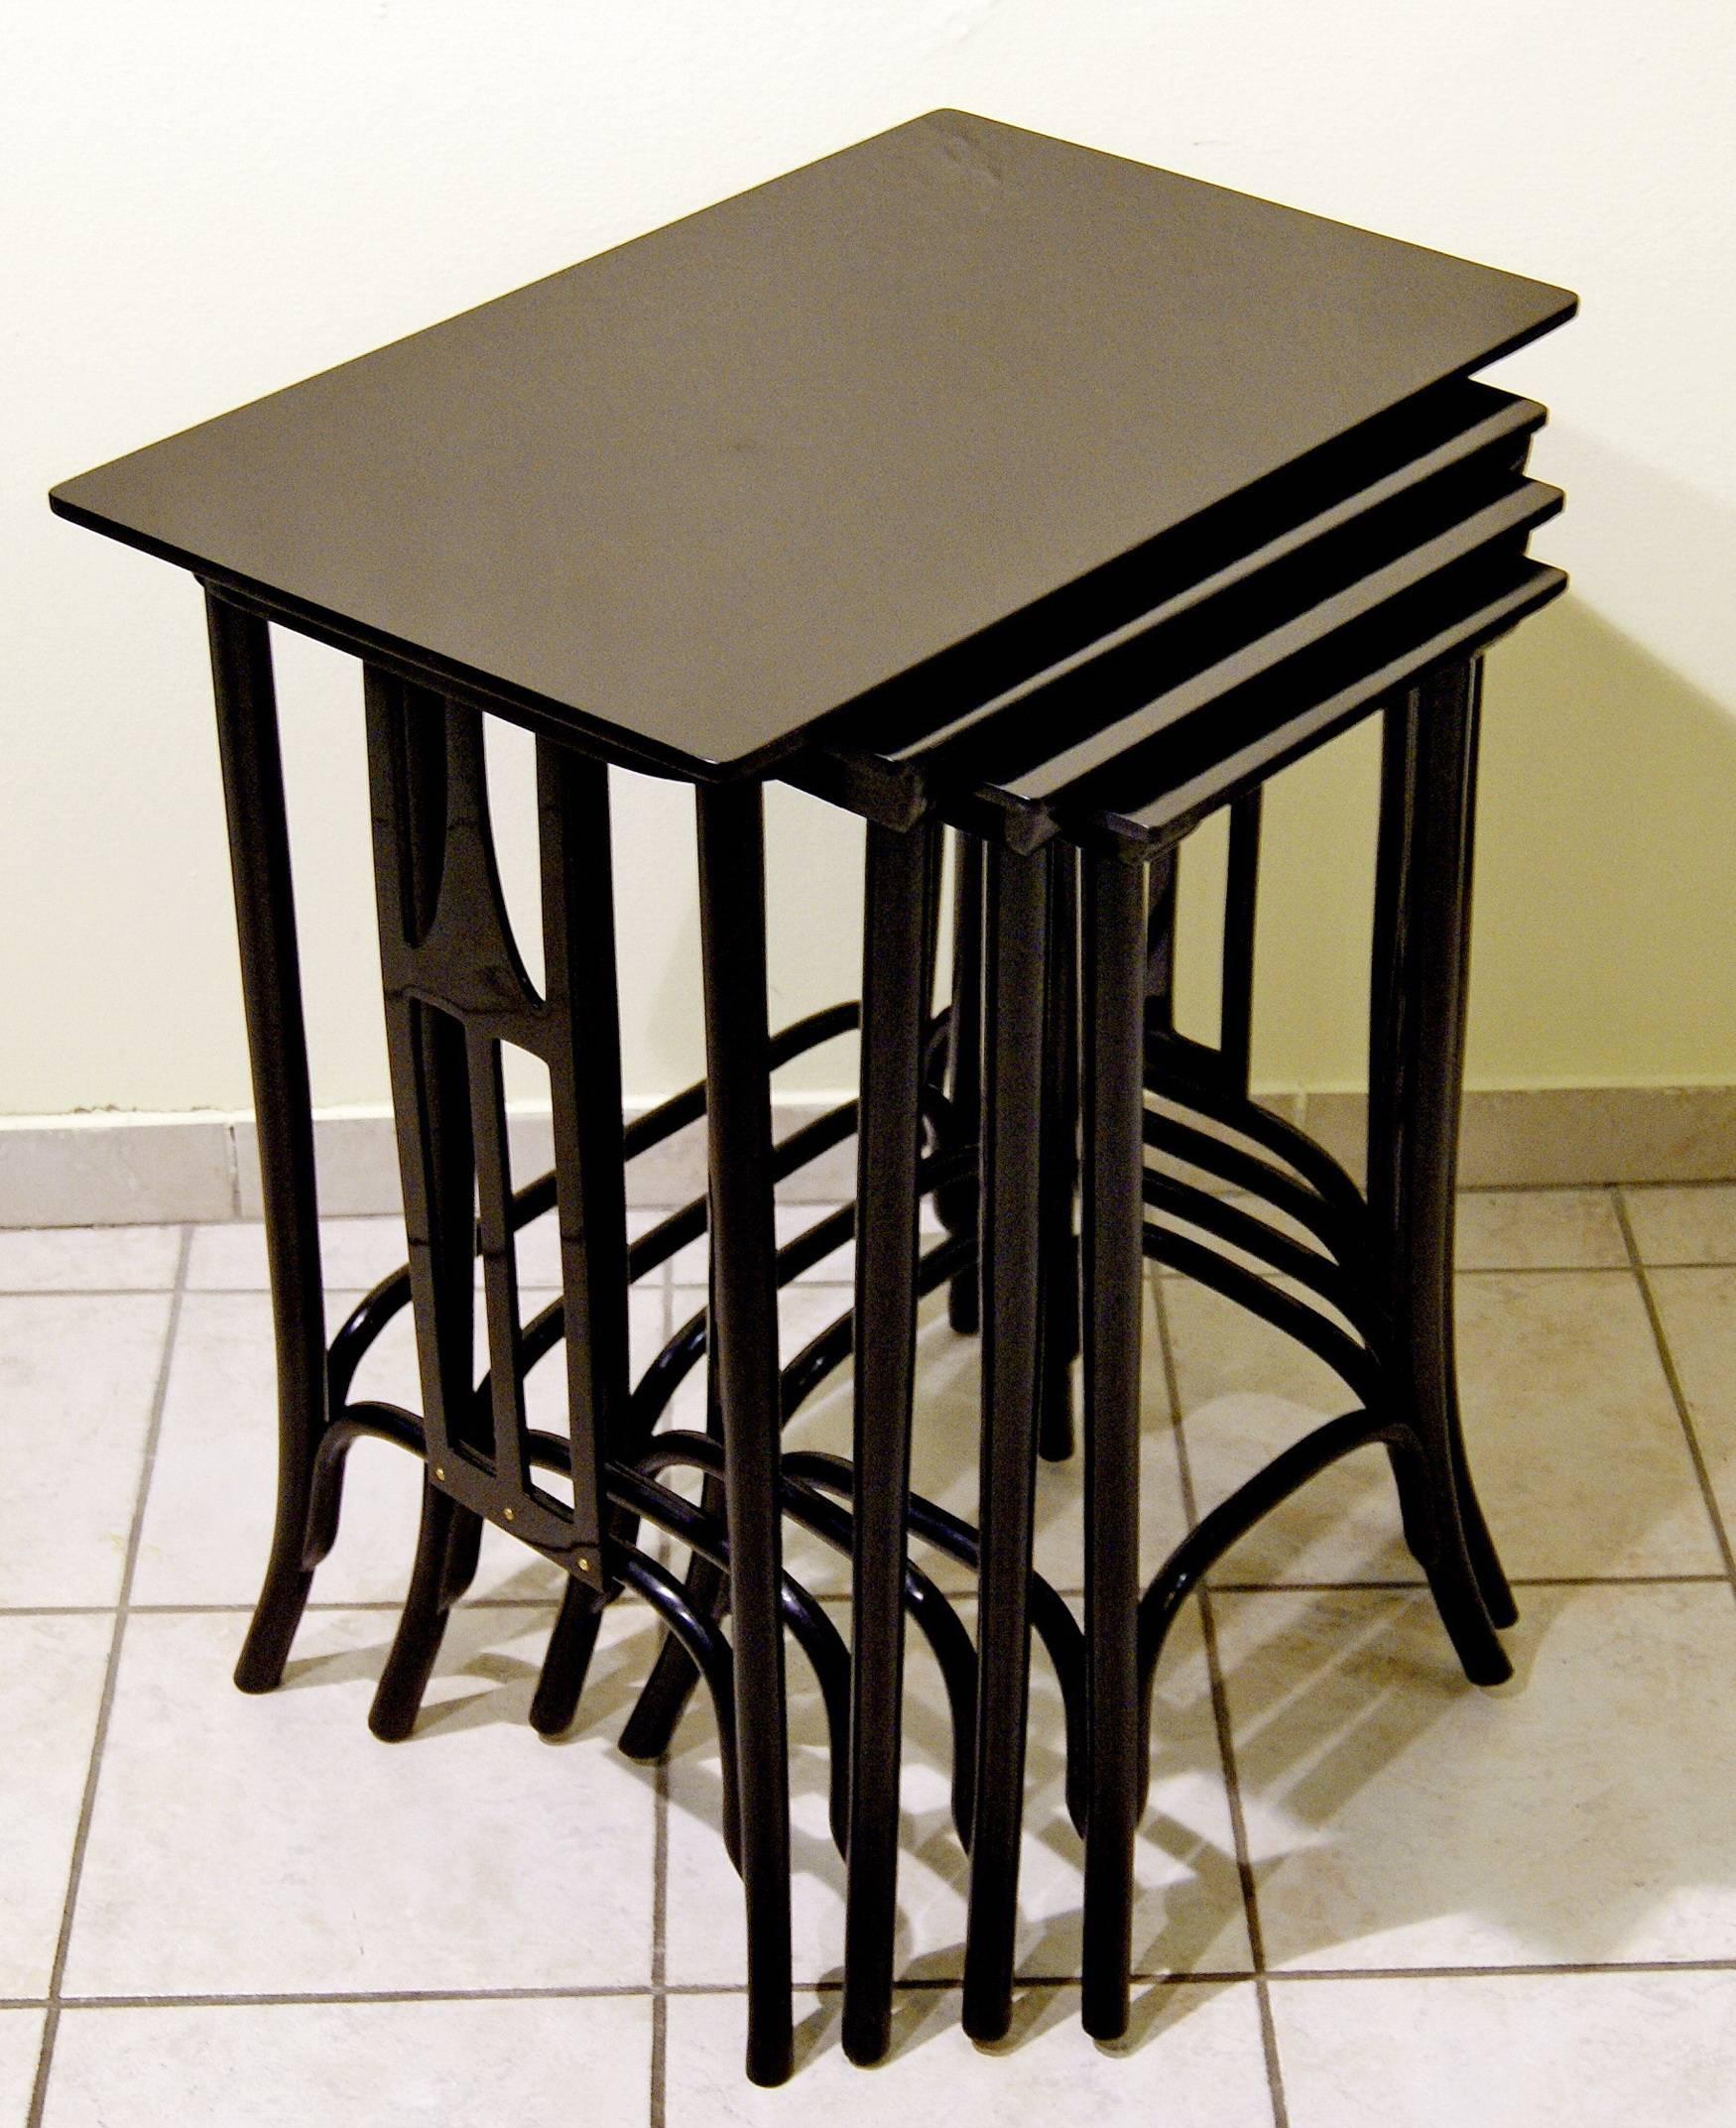 Jacob and Josef Kohn side tables/nesting tables,
Model number 958 A, set of four pieces. 
Beech wood/black stained/refurbished by hand.
Excellent condition,

Vienna, made circa 1906.

Original vintage furniture deriving from manufacturing